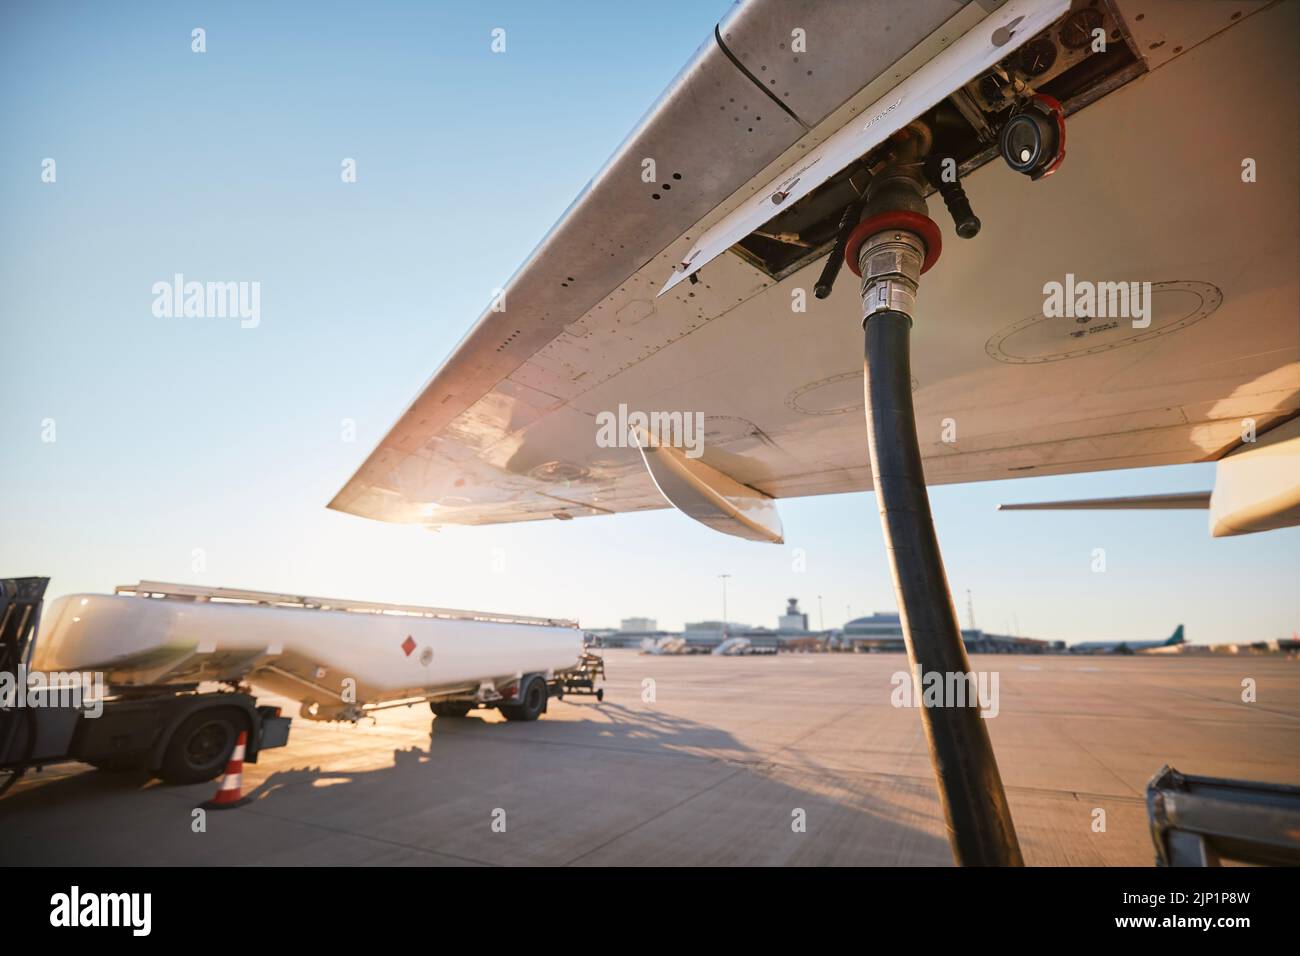 Refueling of airplane at airport. Ground service before flight. Stock Photo